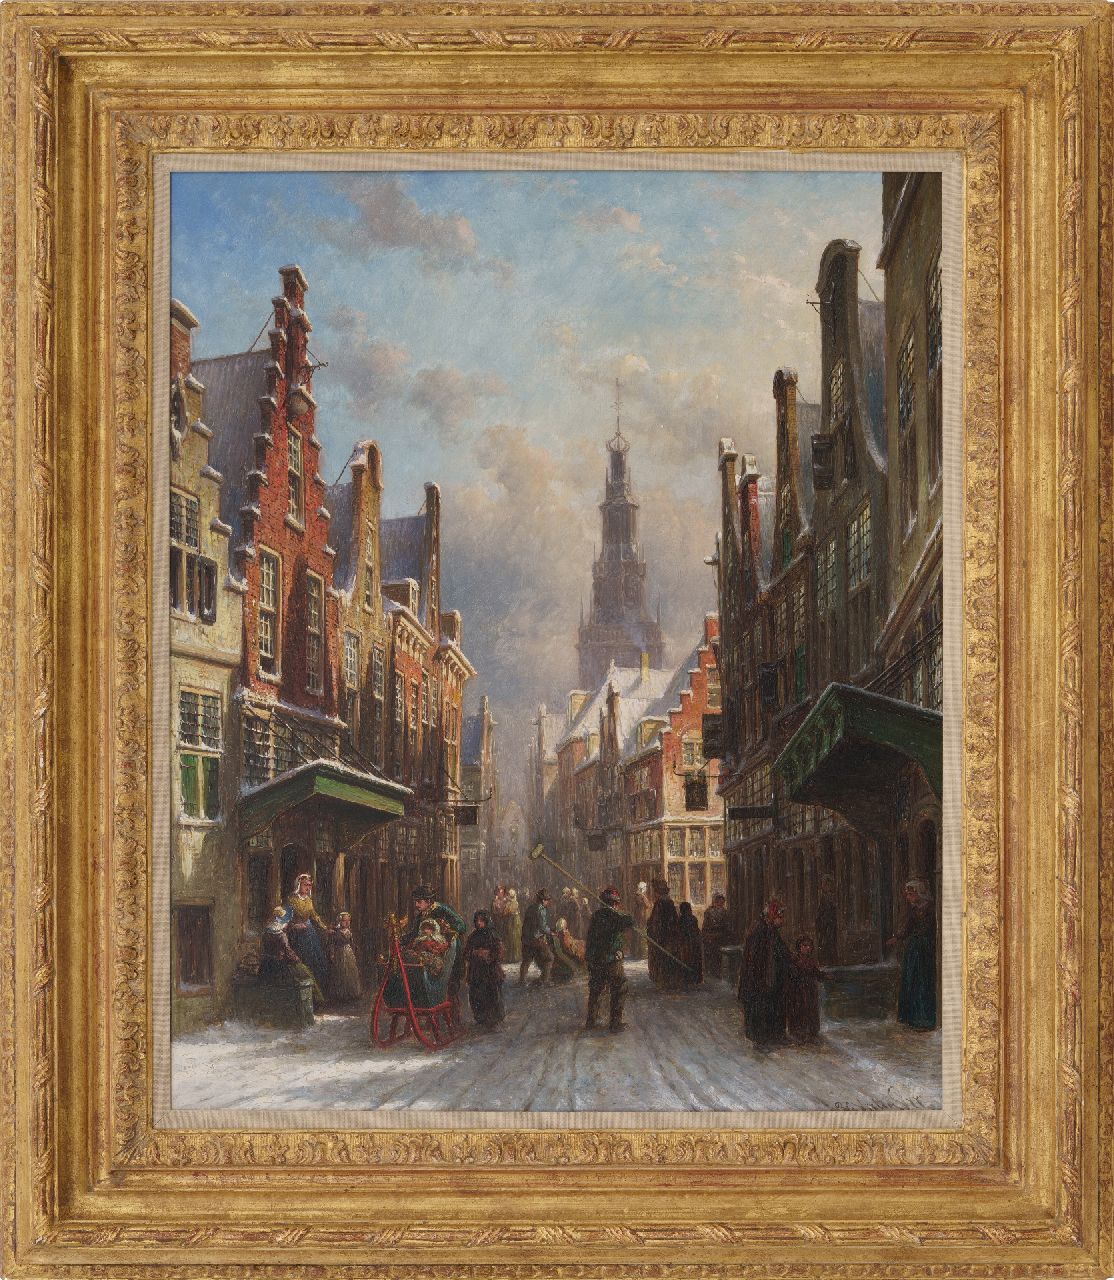 Vertin P.G.  | Petrus Gerardus Vertin, Hustle and bustle in a snow-covered Dutch town, oil on panel 61.2 x 50.2 cm, signed l.r. and dated '77